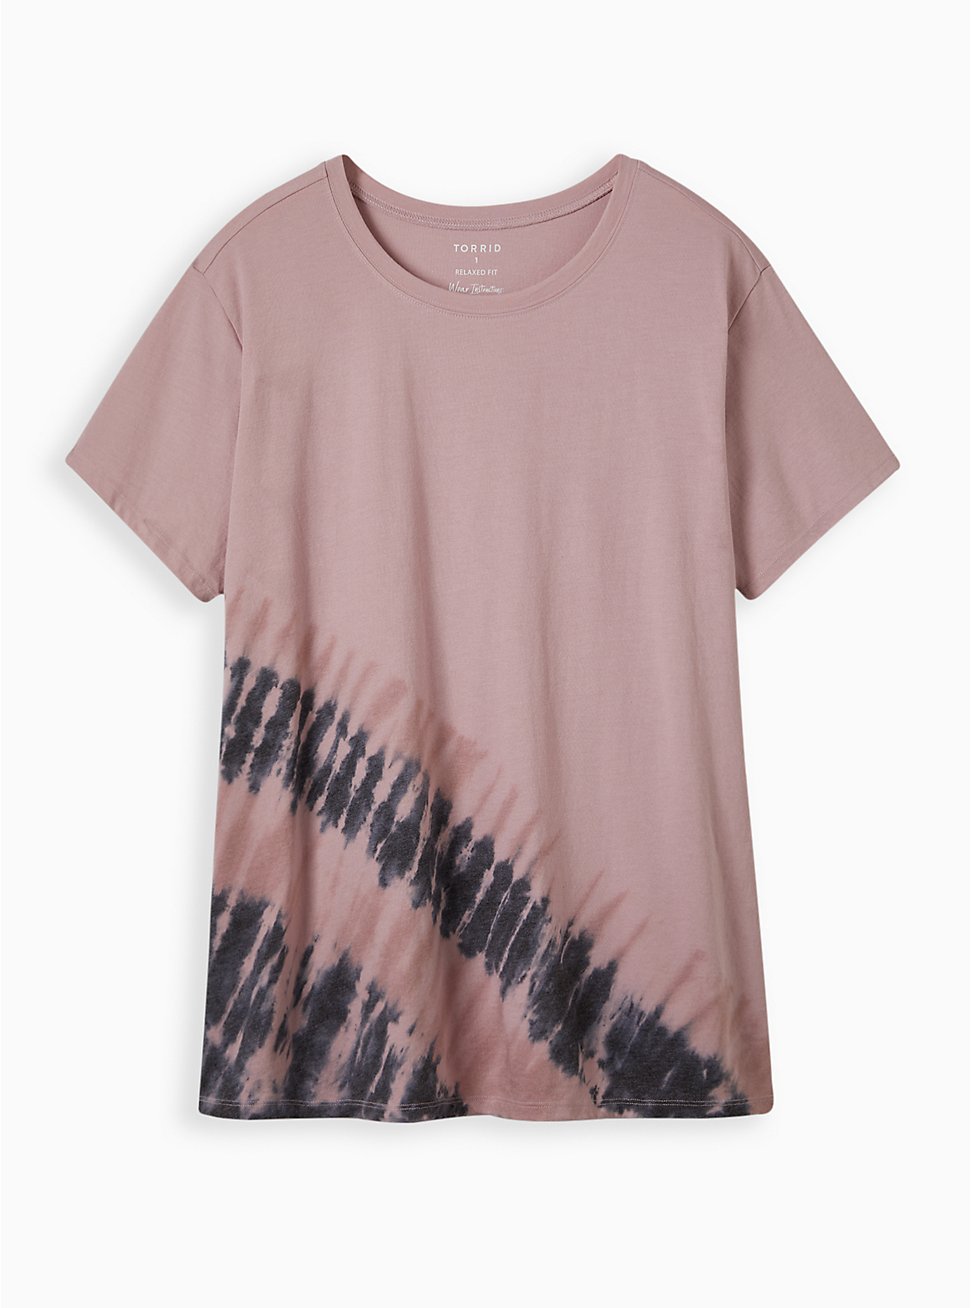 Boxy Tee - Signature Jersey Tie-Dye Pink, OTHER PRINTS, hi-res